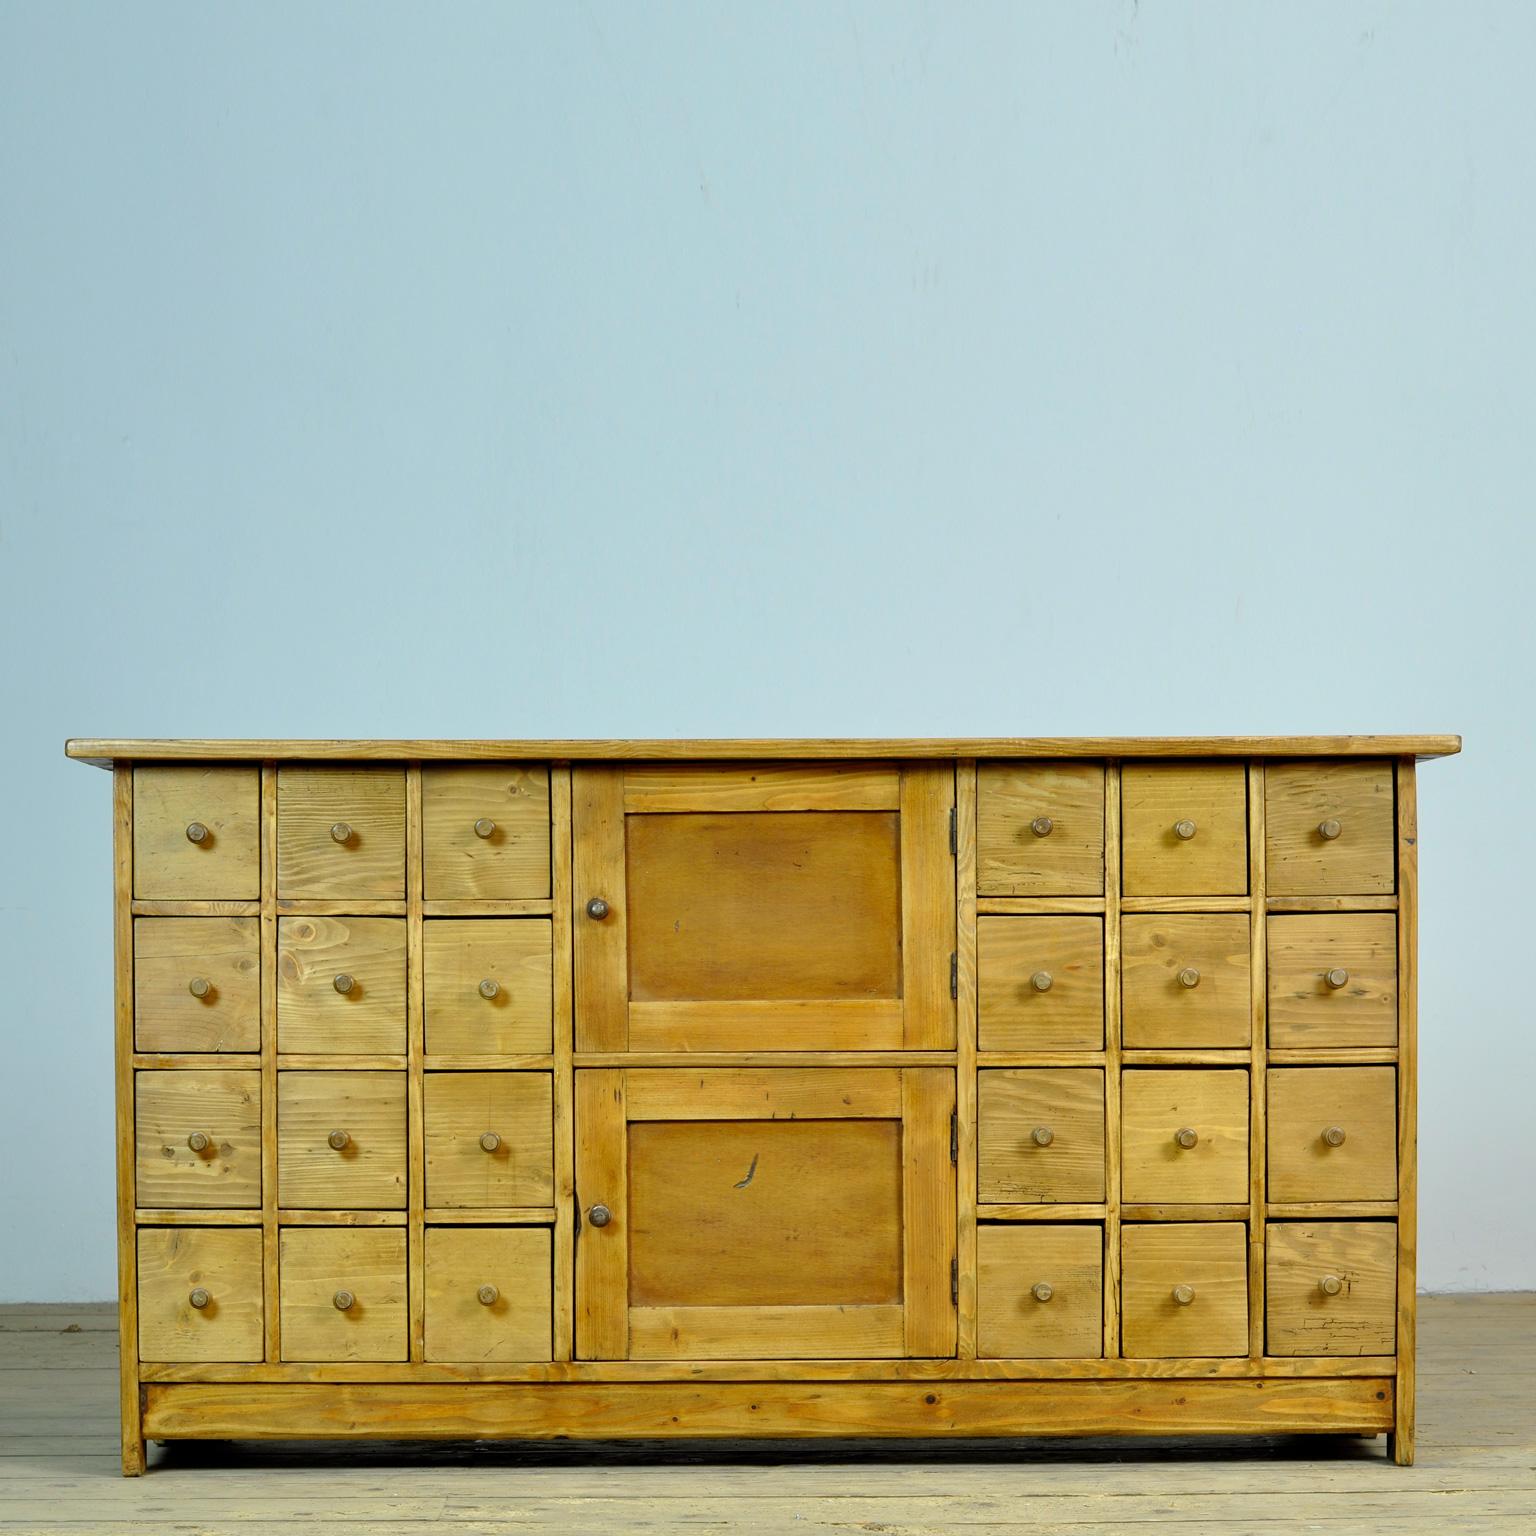 Pine chest of drawers from circa 1940. The chest has 24 drawers en 2 doors. Very nice piece for in the hallway!
Some of the drawers have been replaced as well as the wooden knobs.